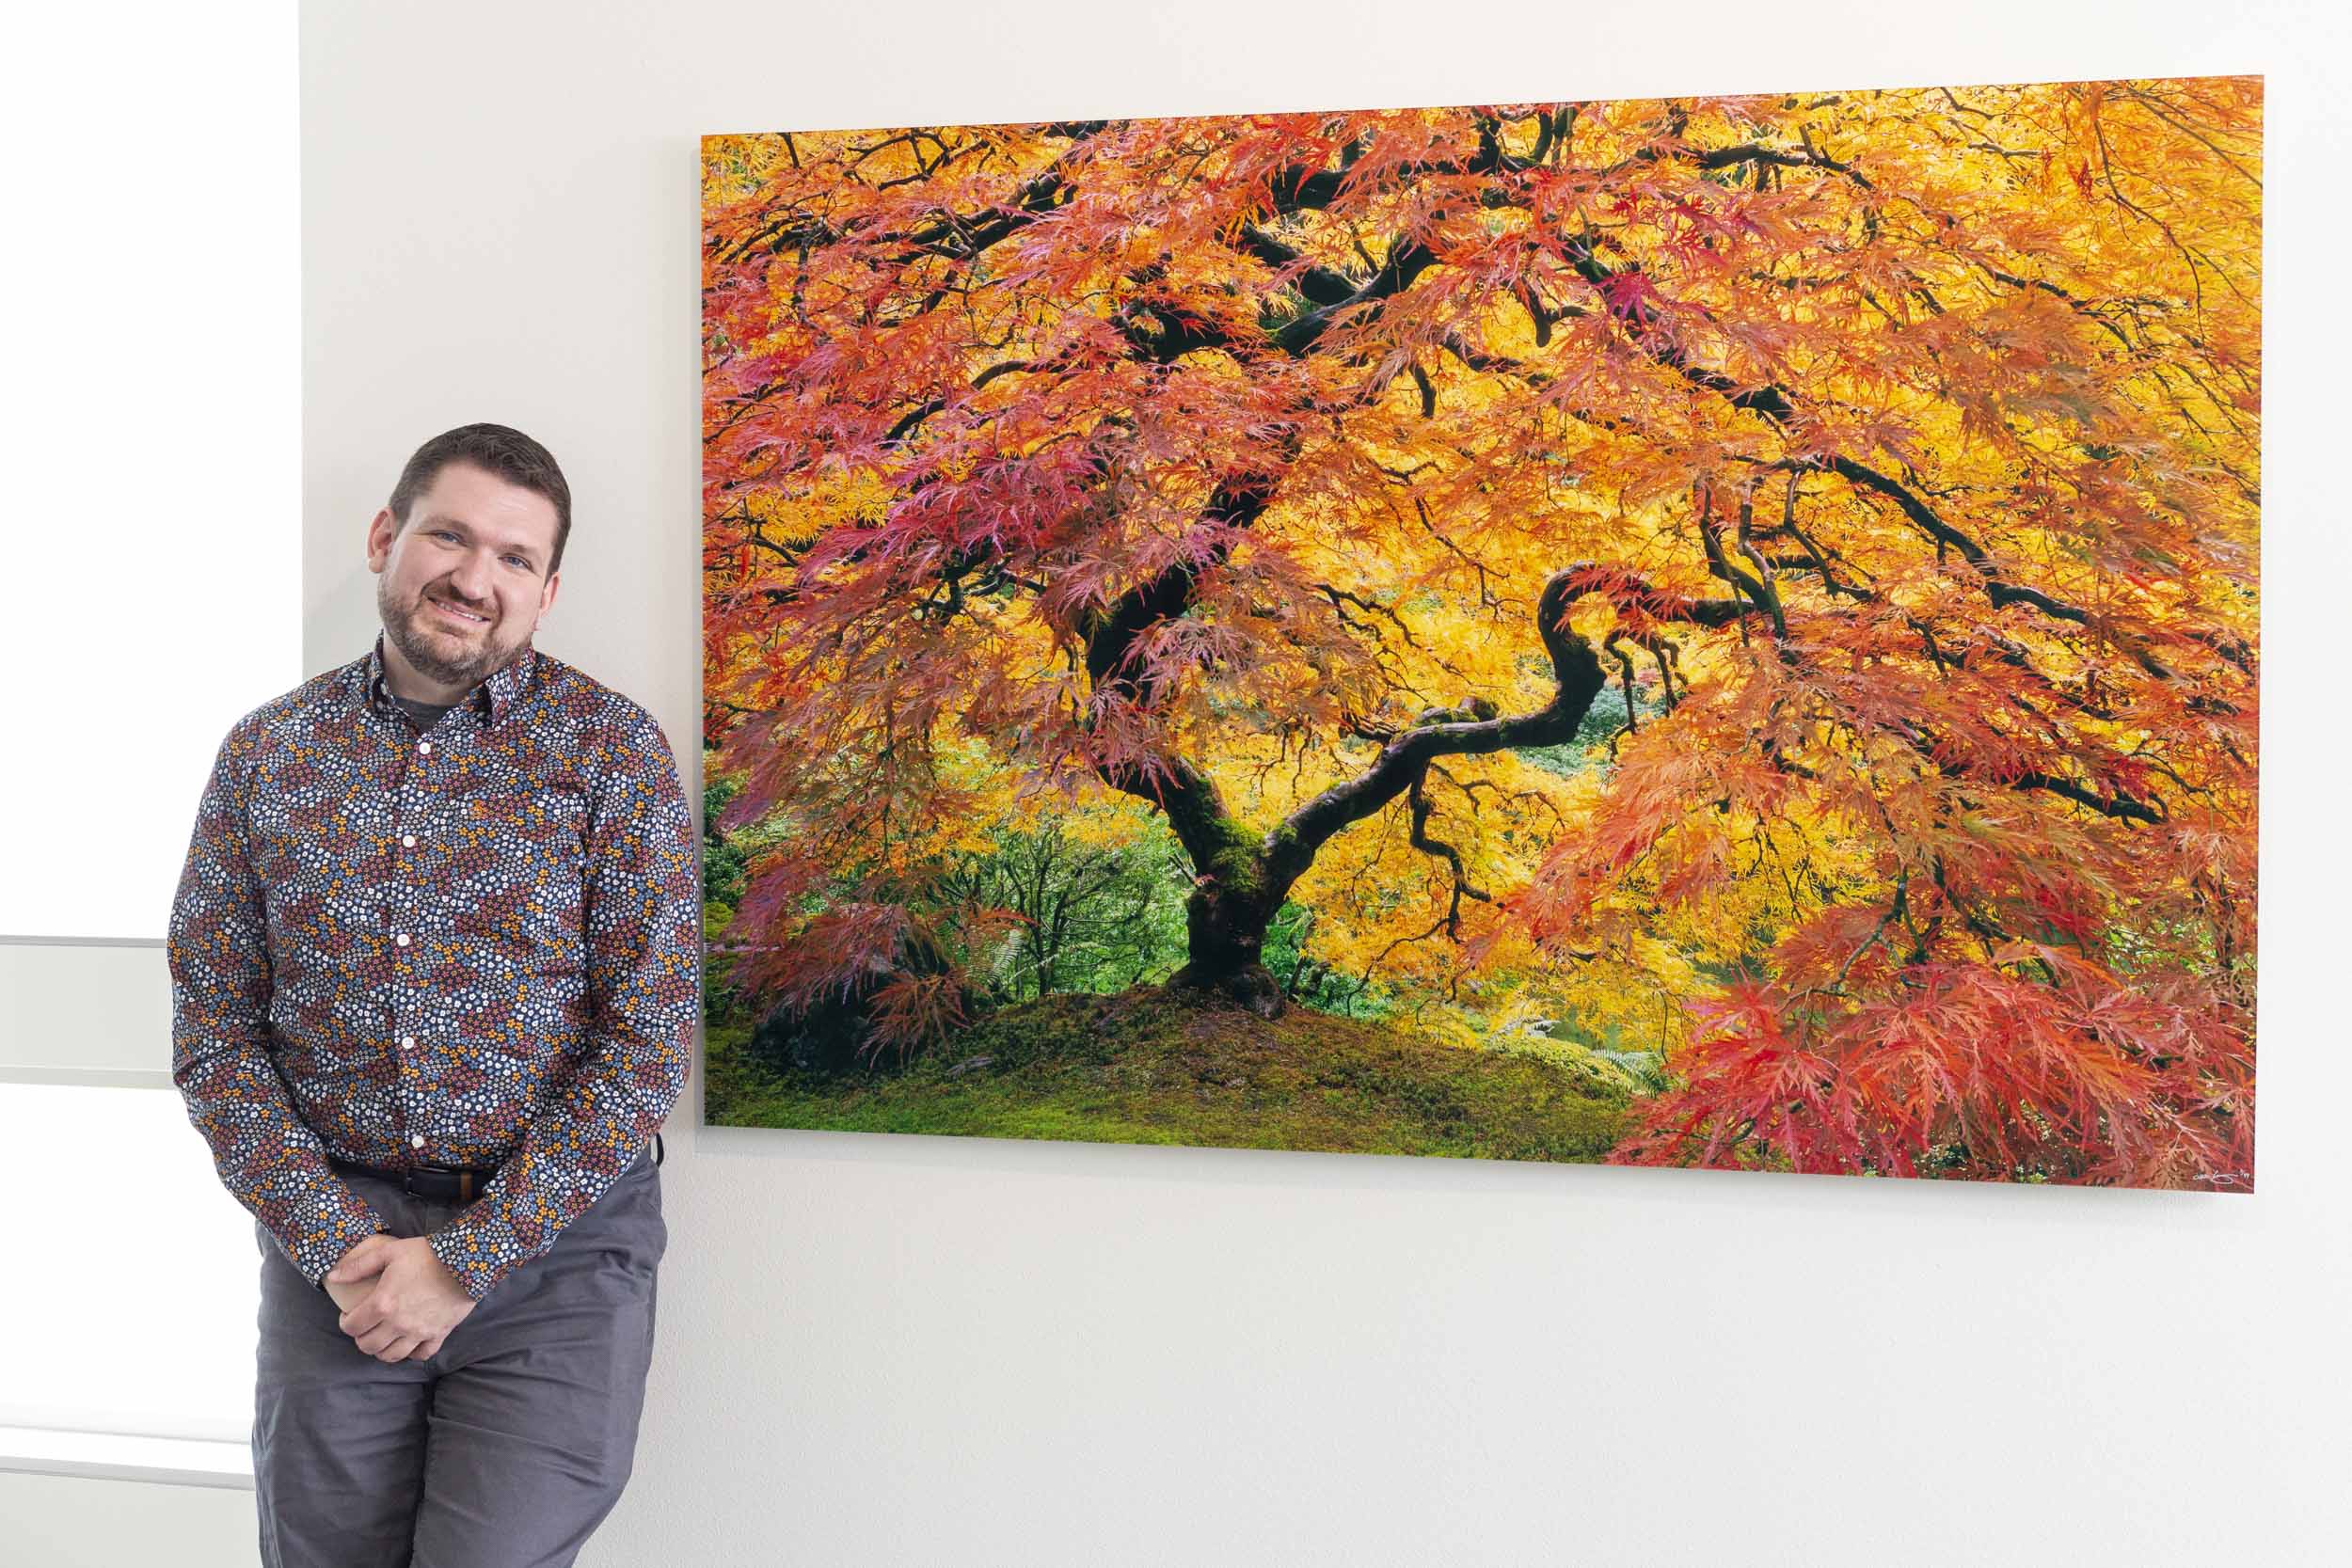 A picture of the famous maple tree at the Portland Japanese Garden hangs in a living room.